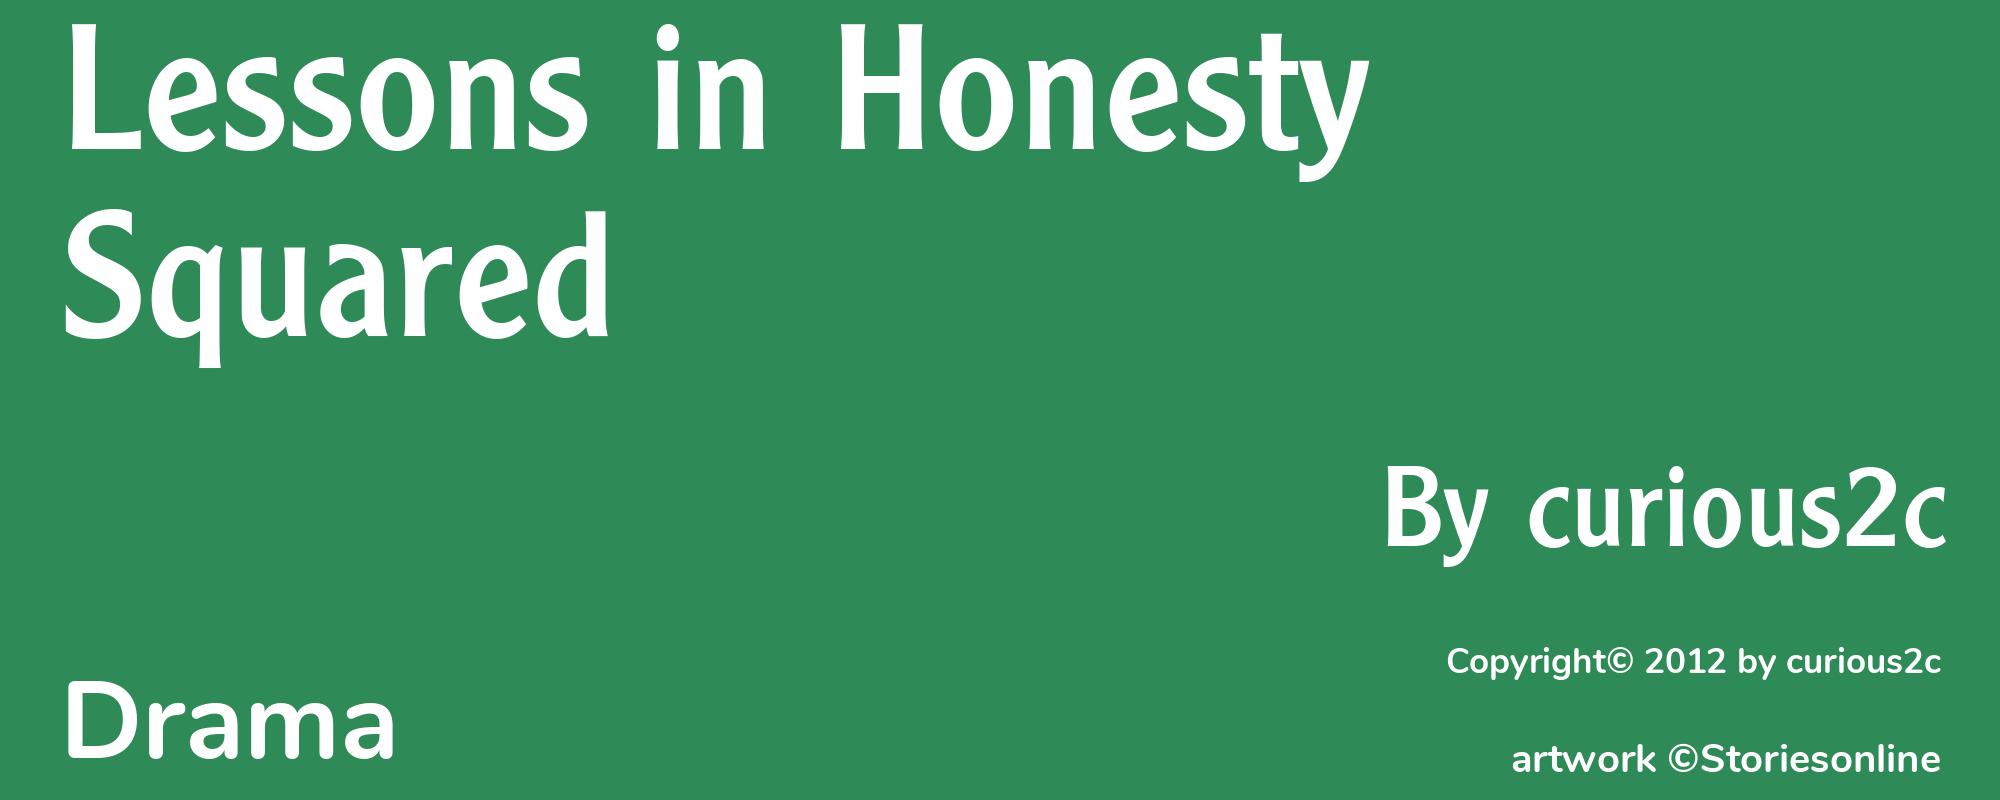 Lessons in Honesty Squared - Cover